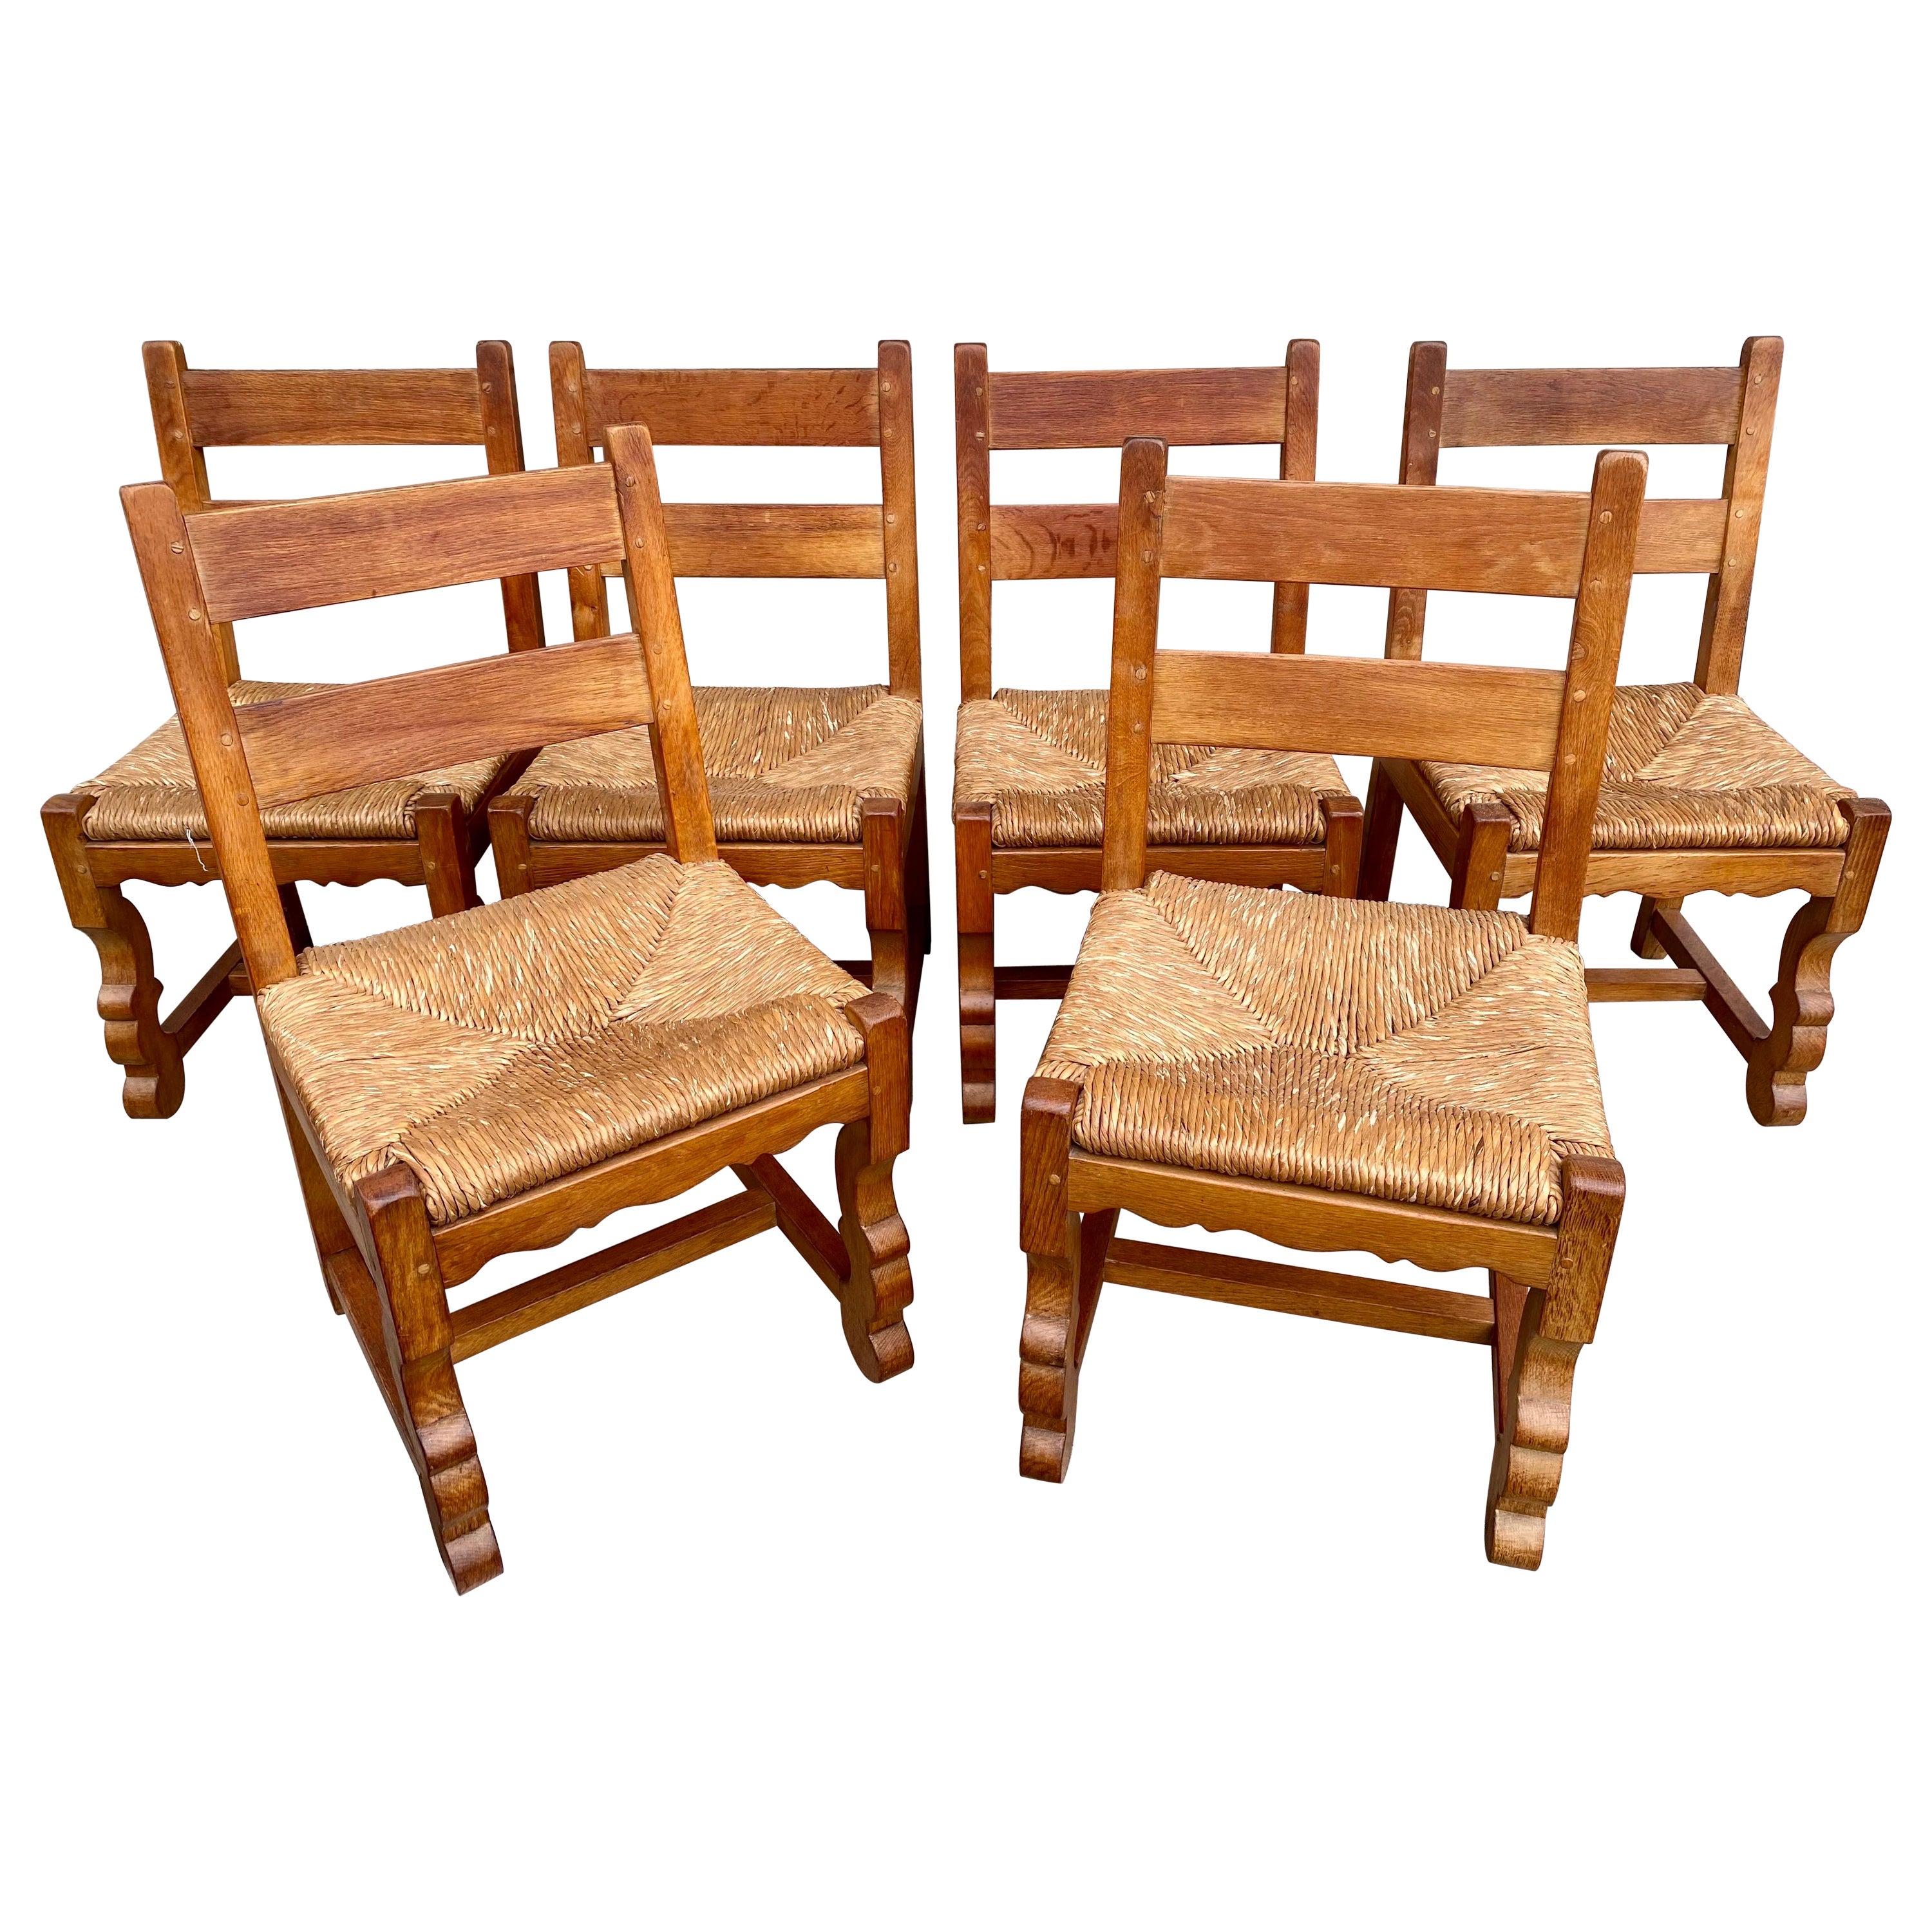 Set of 6 Brutalist Oak and Rush Dining Chairs, Circa 1960s, France For Sale